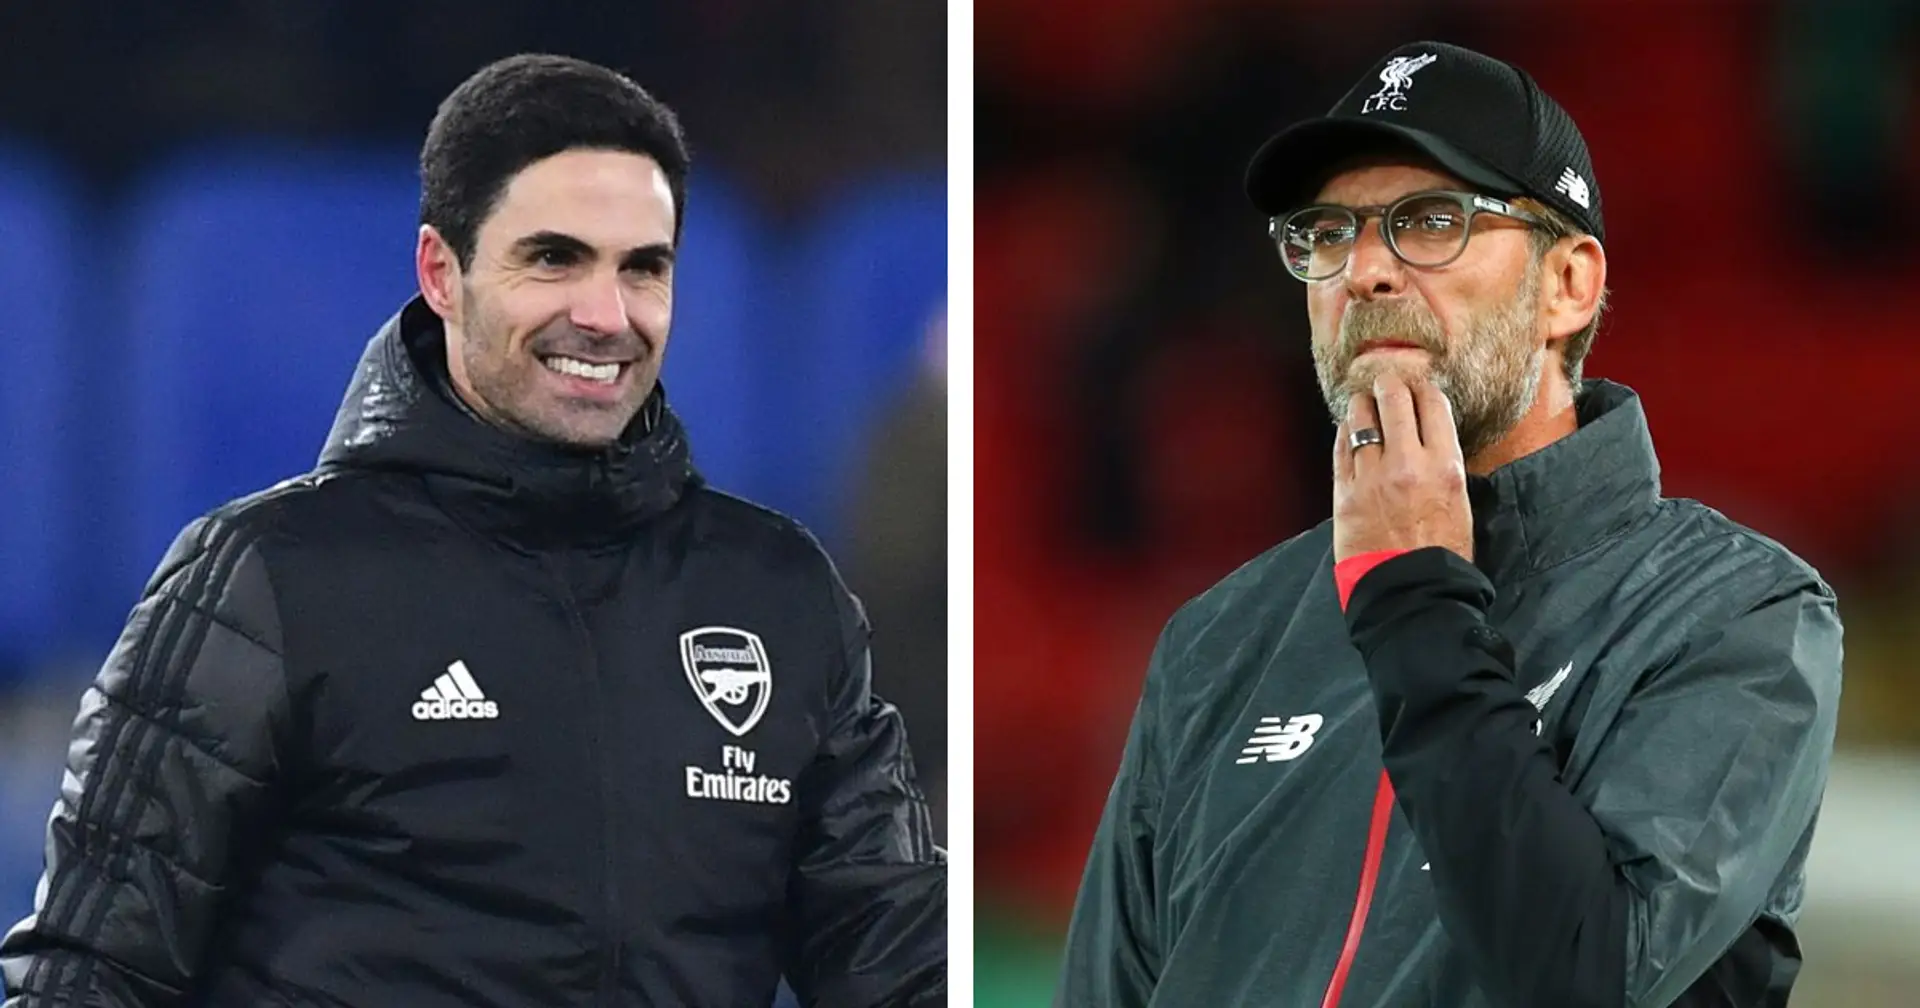 Arsenal to face Liverpool in Carabao Cup fourth round, we've  beaten them twice in 2 recent meetings